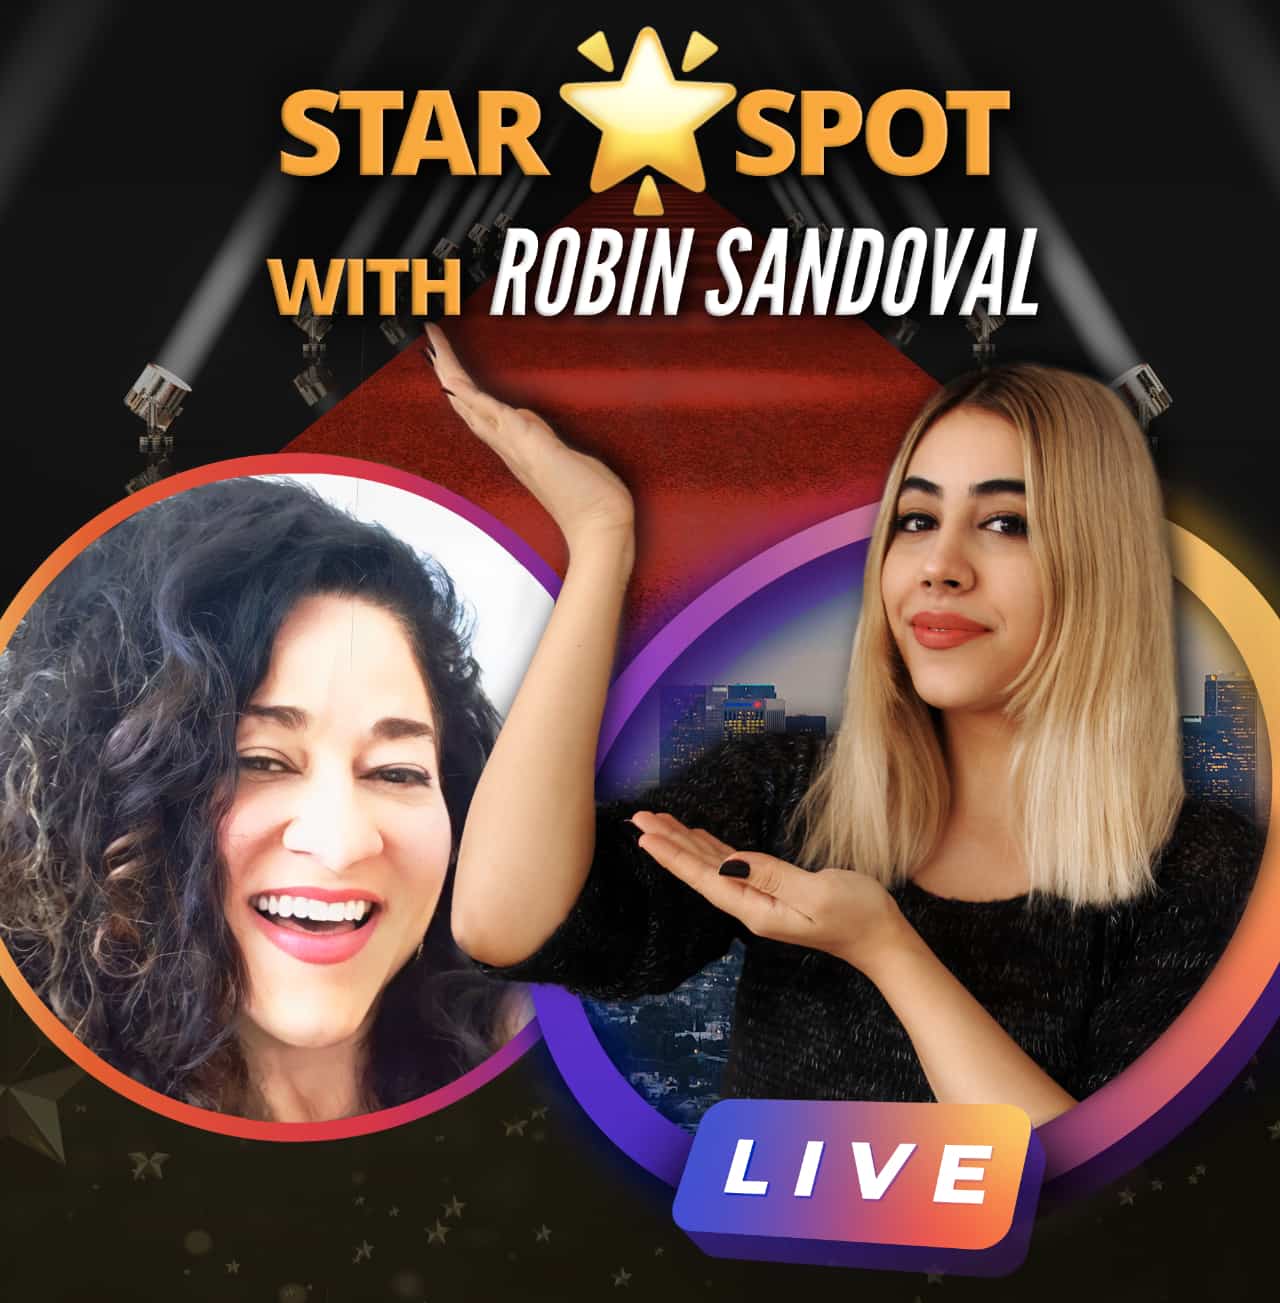 Promotional cover art of Star Spot with Robin Sandoval